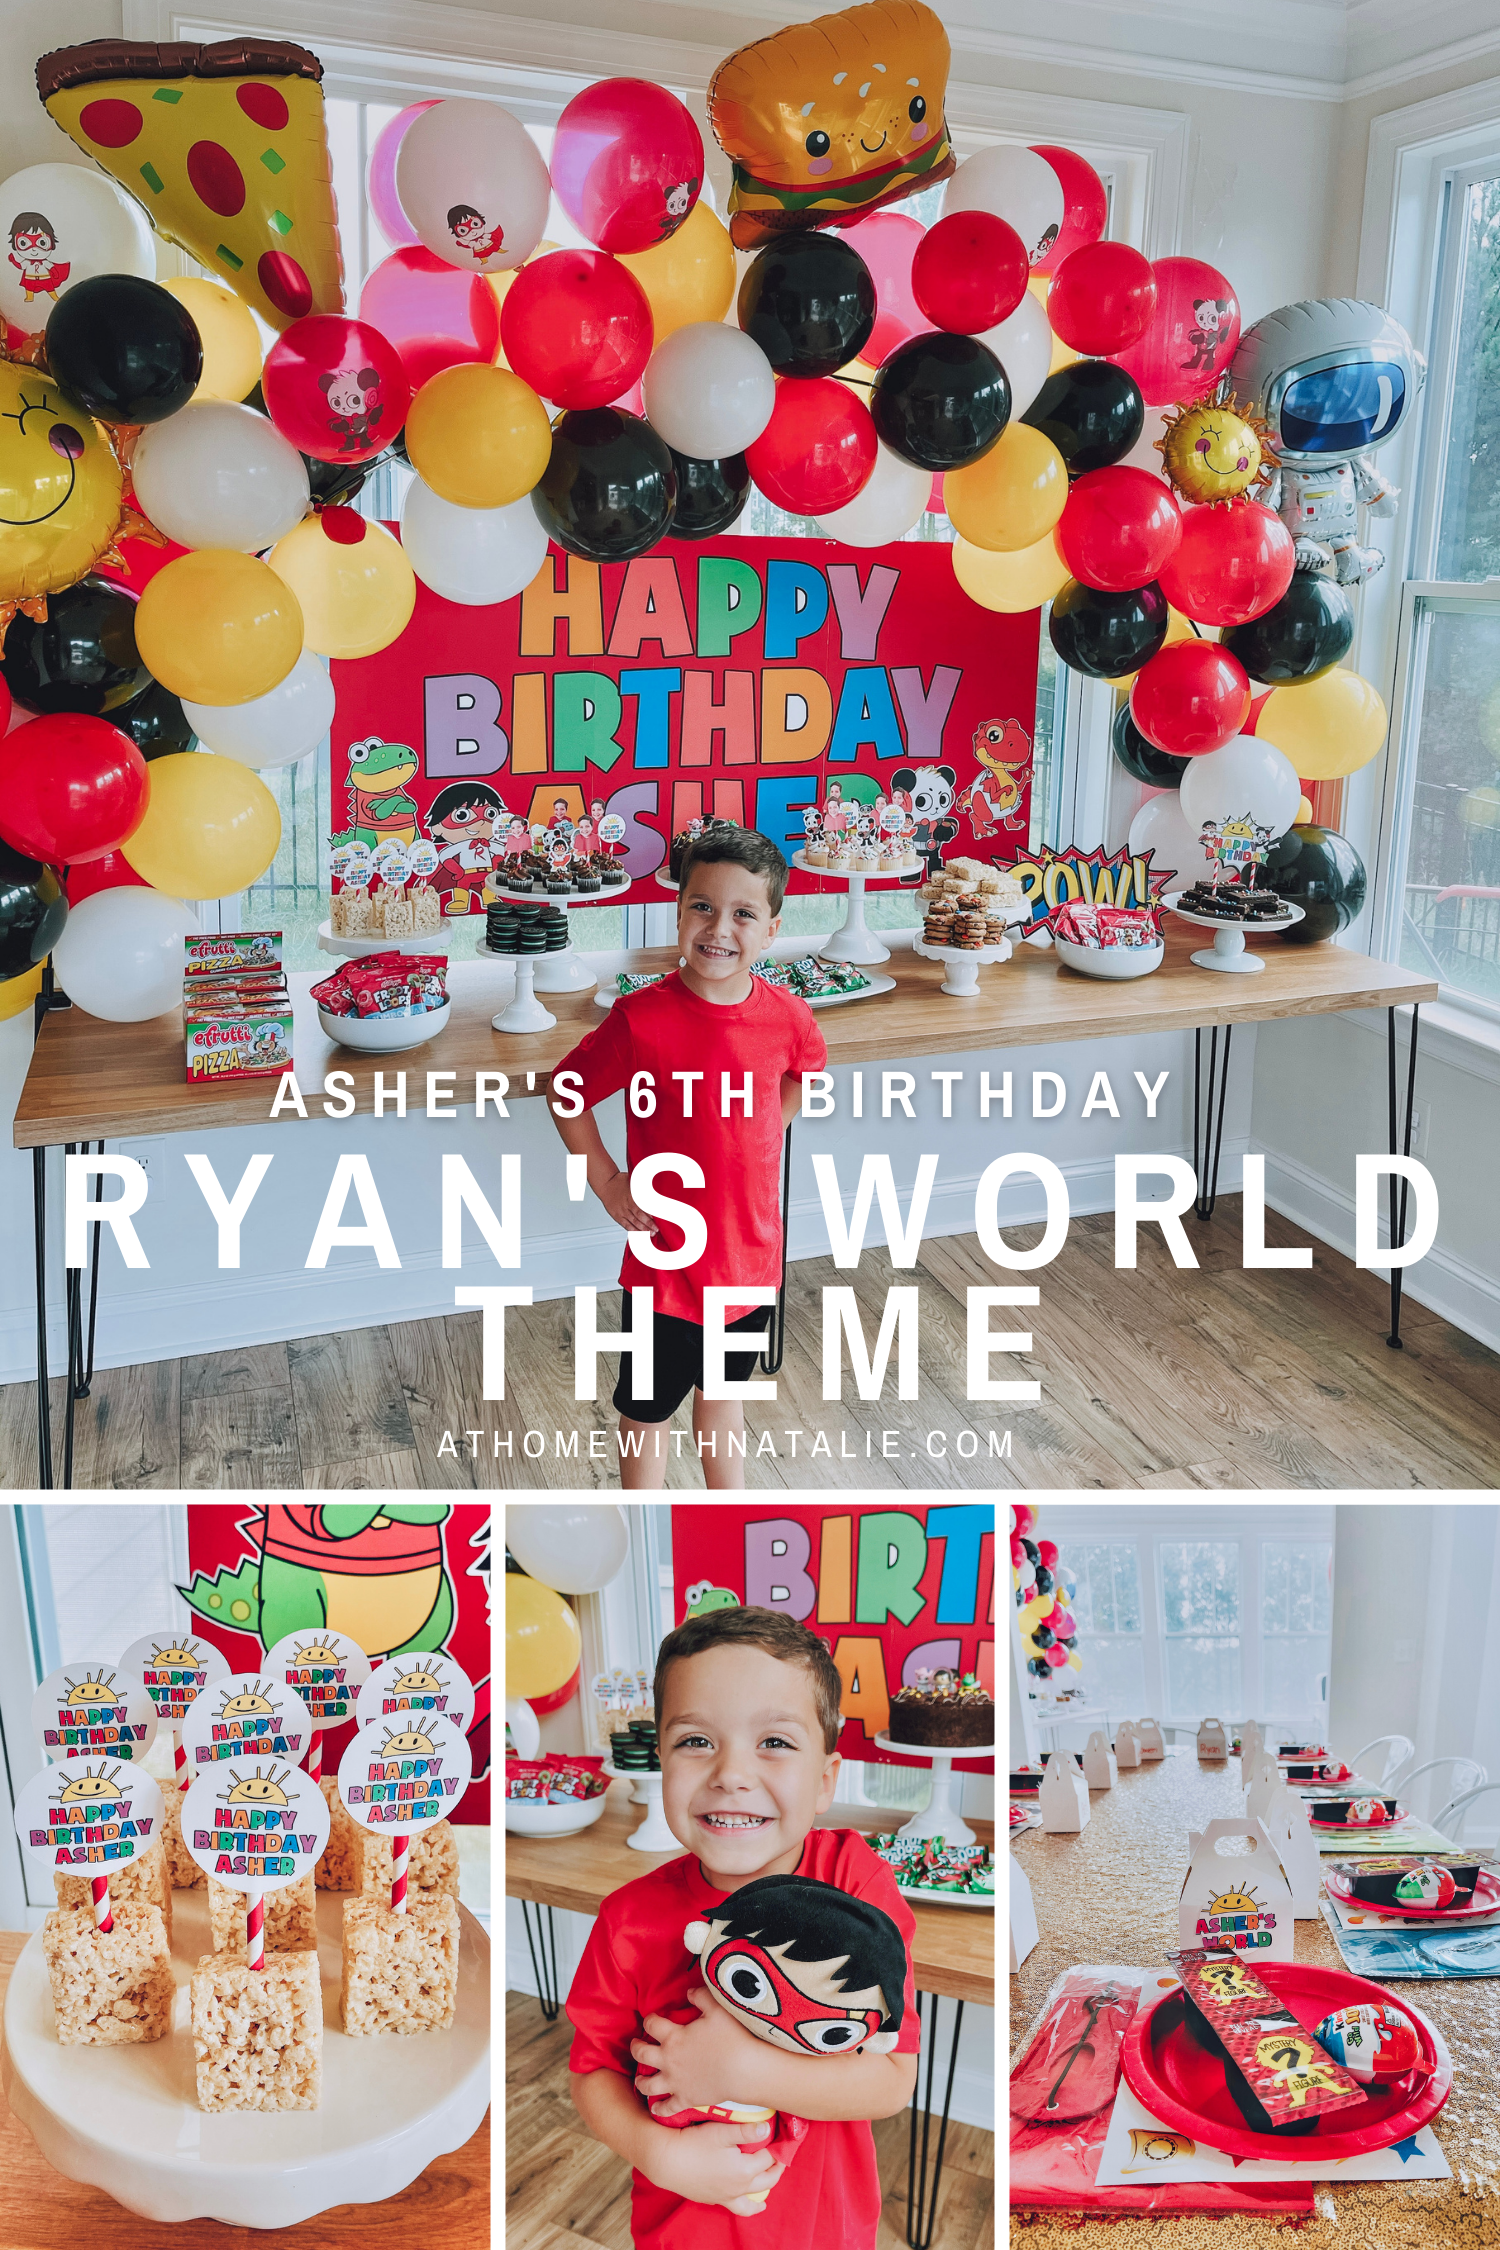 Asher's 6th Birthday – Ryan's World Theme – At Home With Natalie